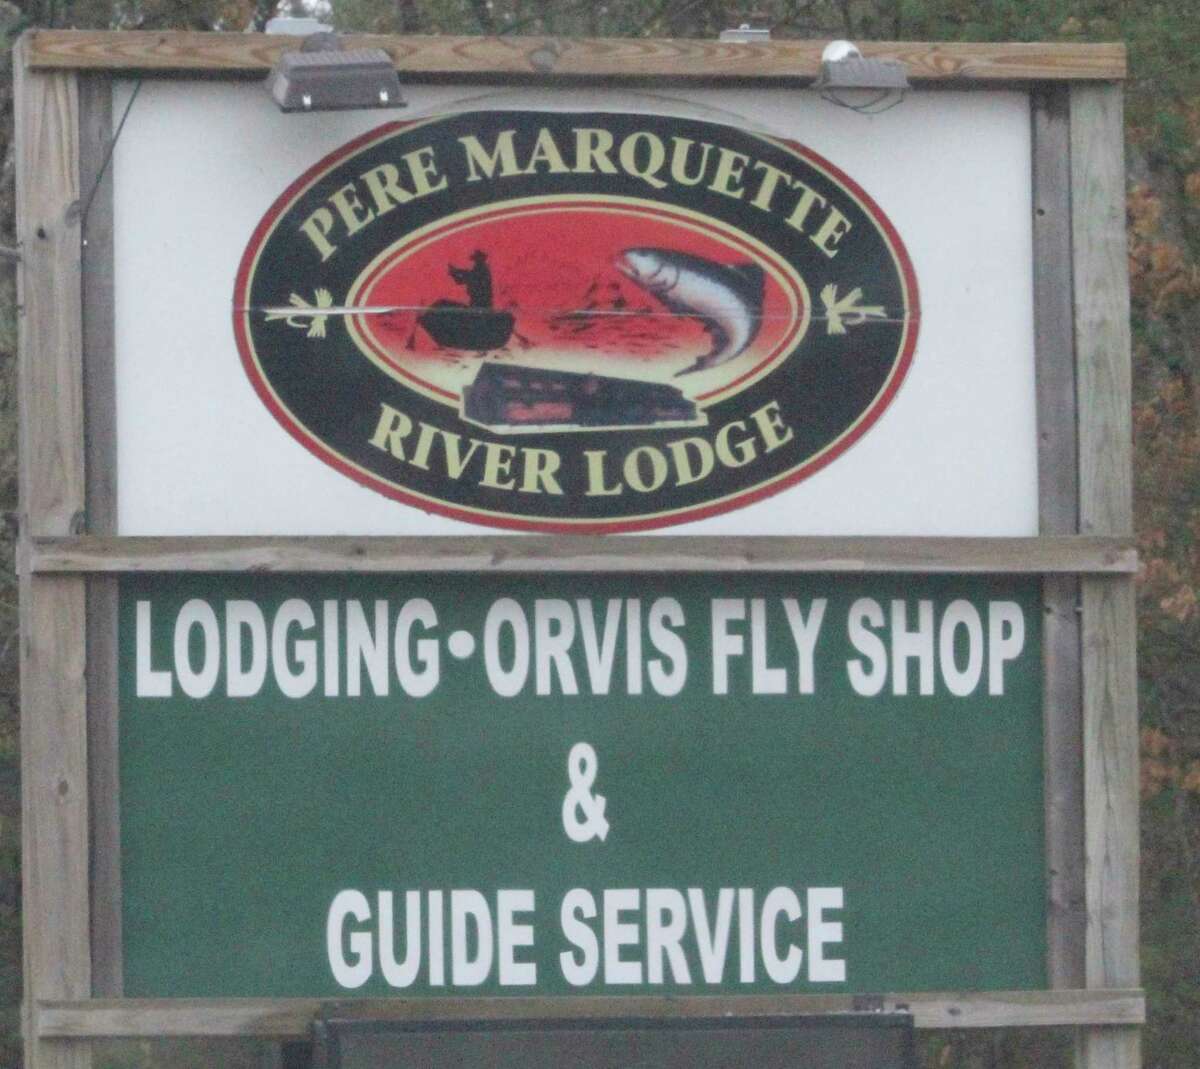 Pere Marquette River Lodge is keeping its guides very active. (Star photo/John Raffel)